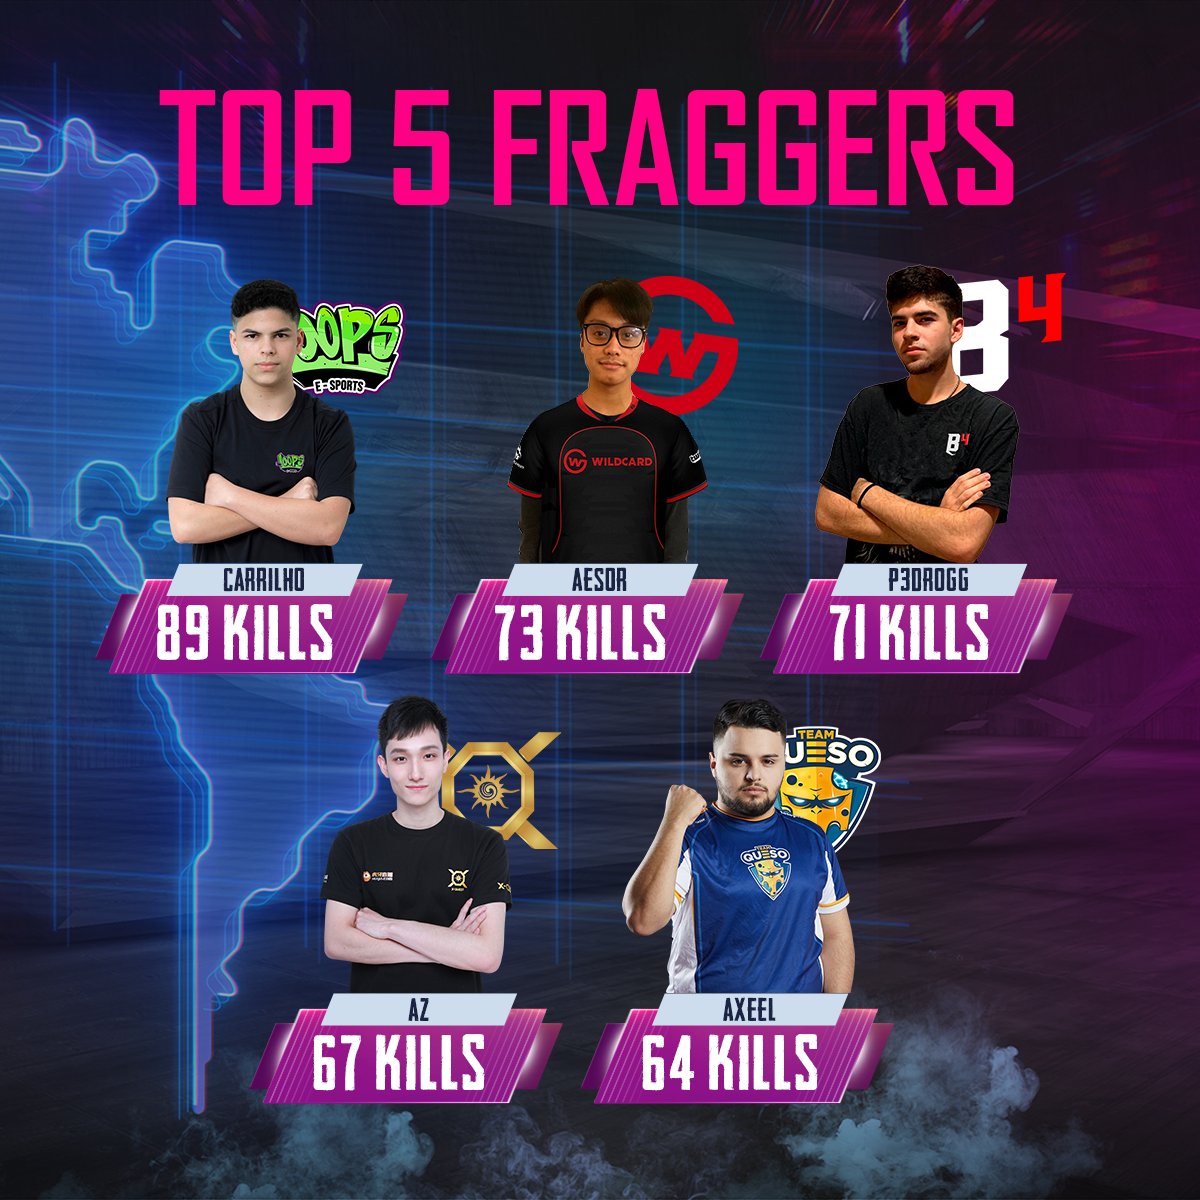 PUBG MOBILE Esports on Twitter: "The Top 5 Fraggers of the #PMPL Americas! We have team players from both North America and South America in the Top 5, with @loopsesports's Carrilho